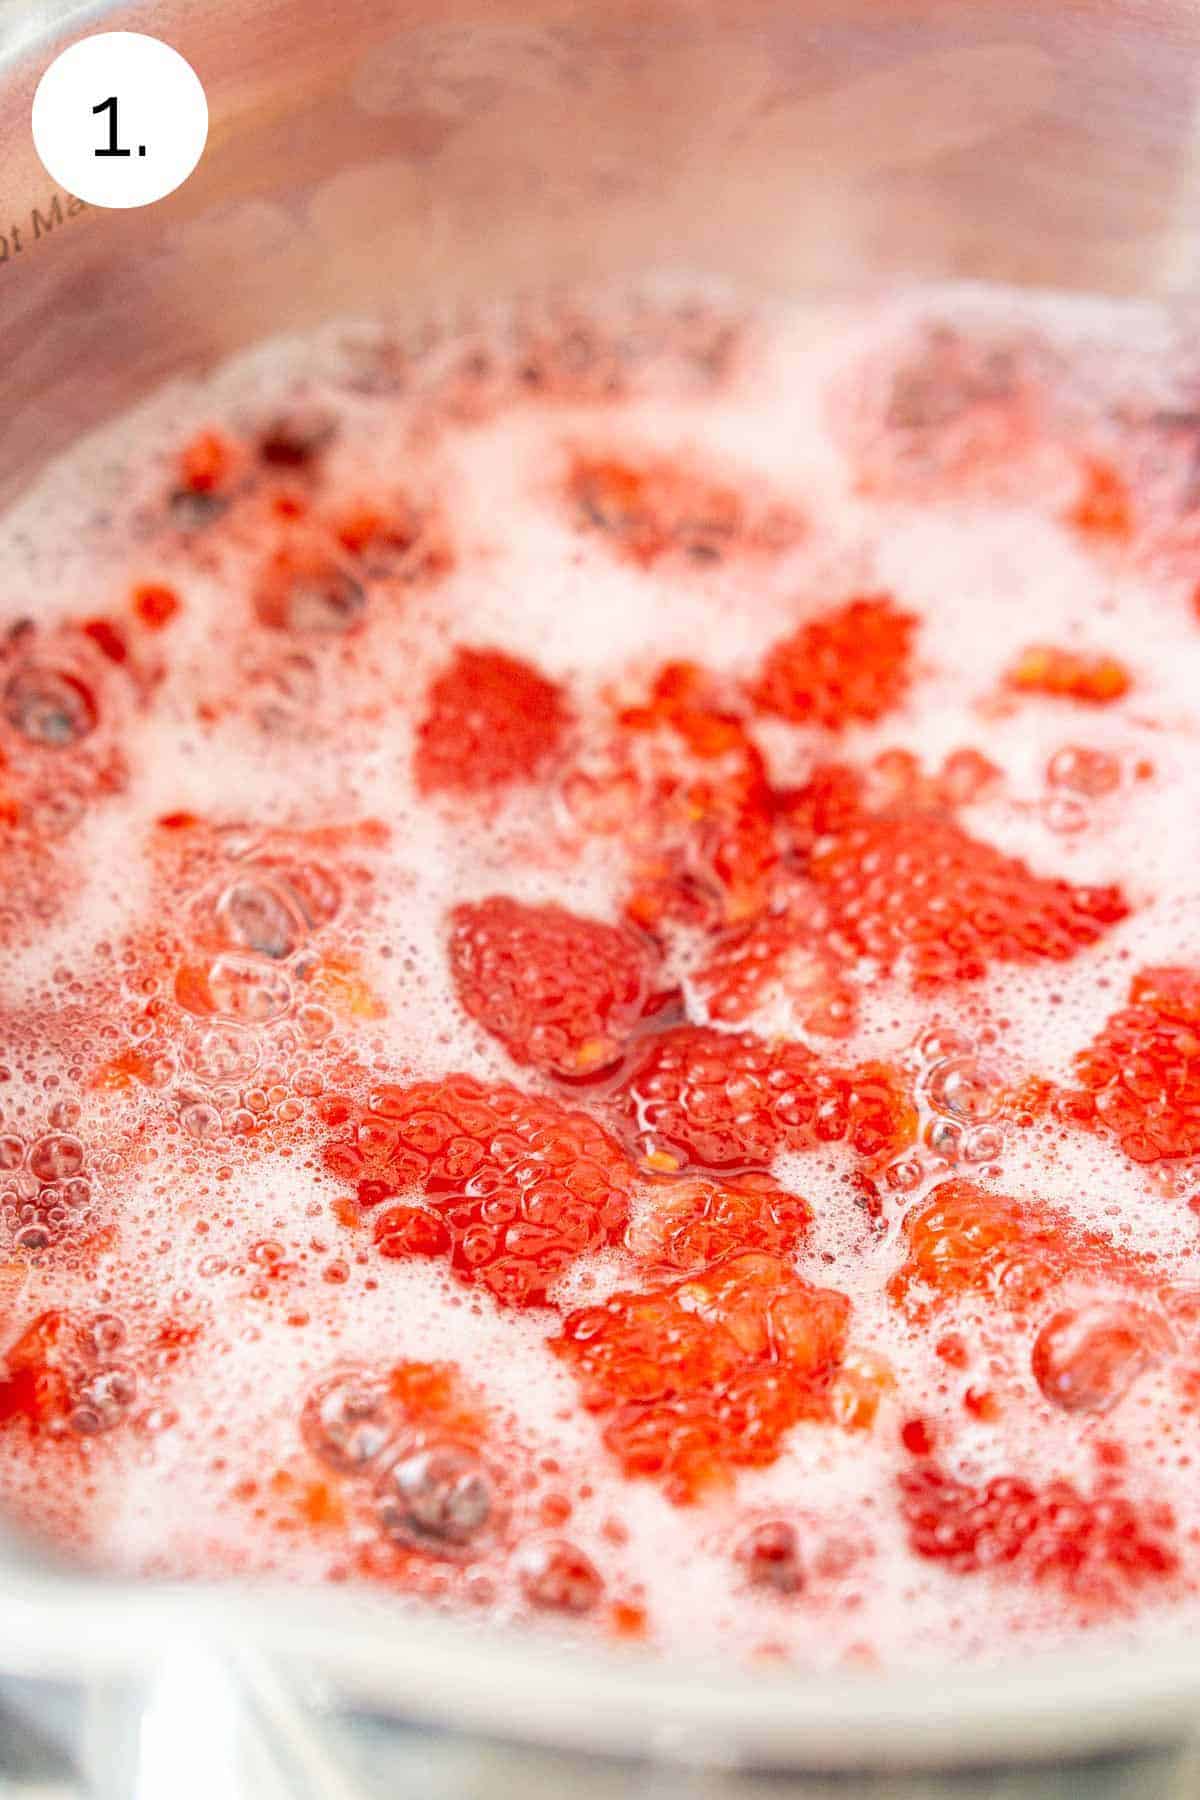 The raspberry mixture boiling in a small stainless steel saucepan on a stove-top range.